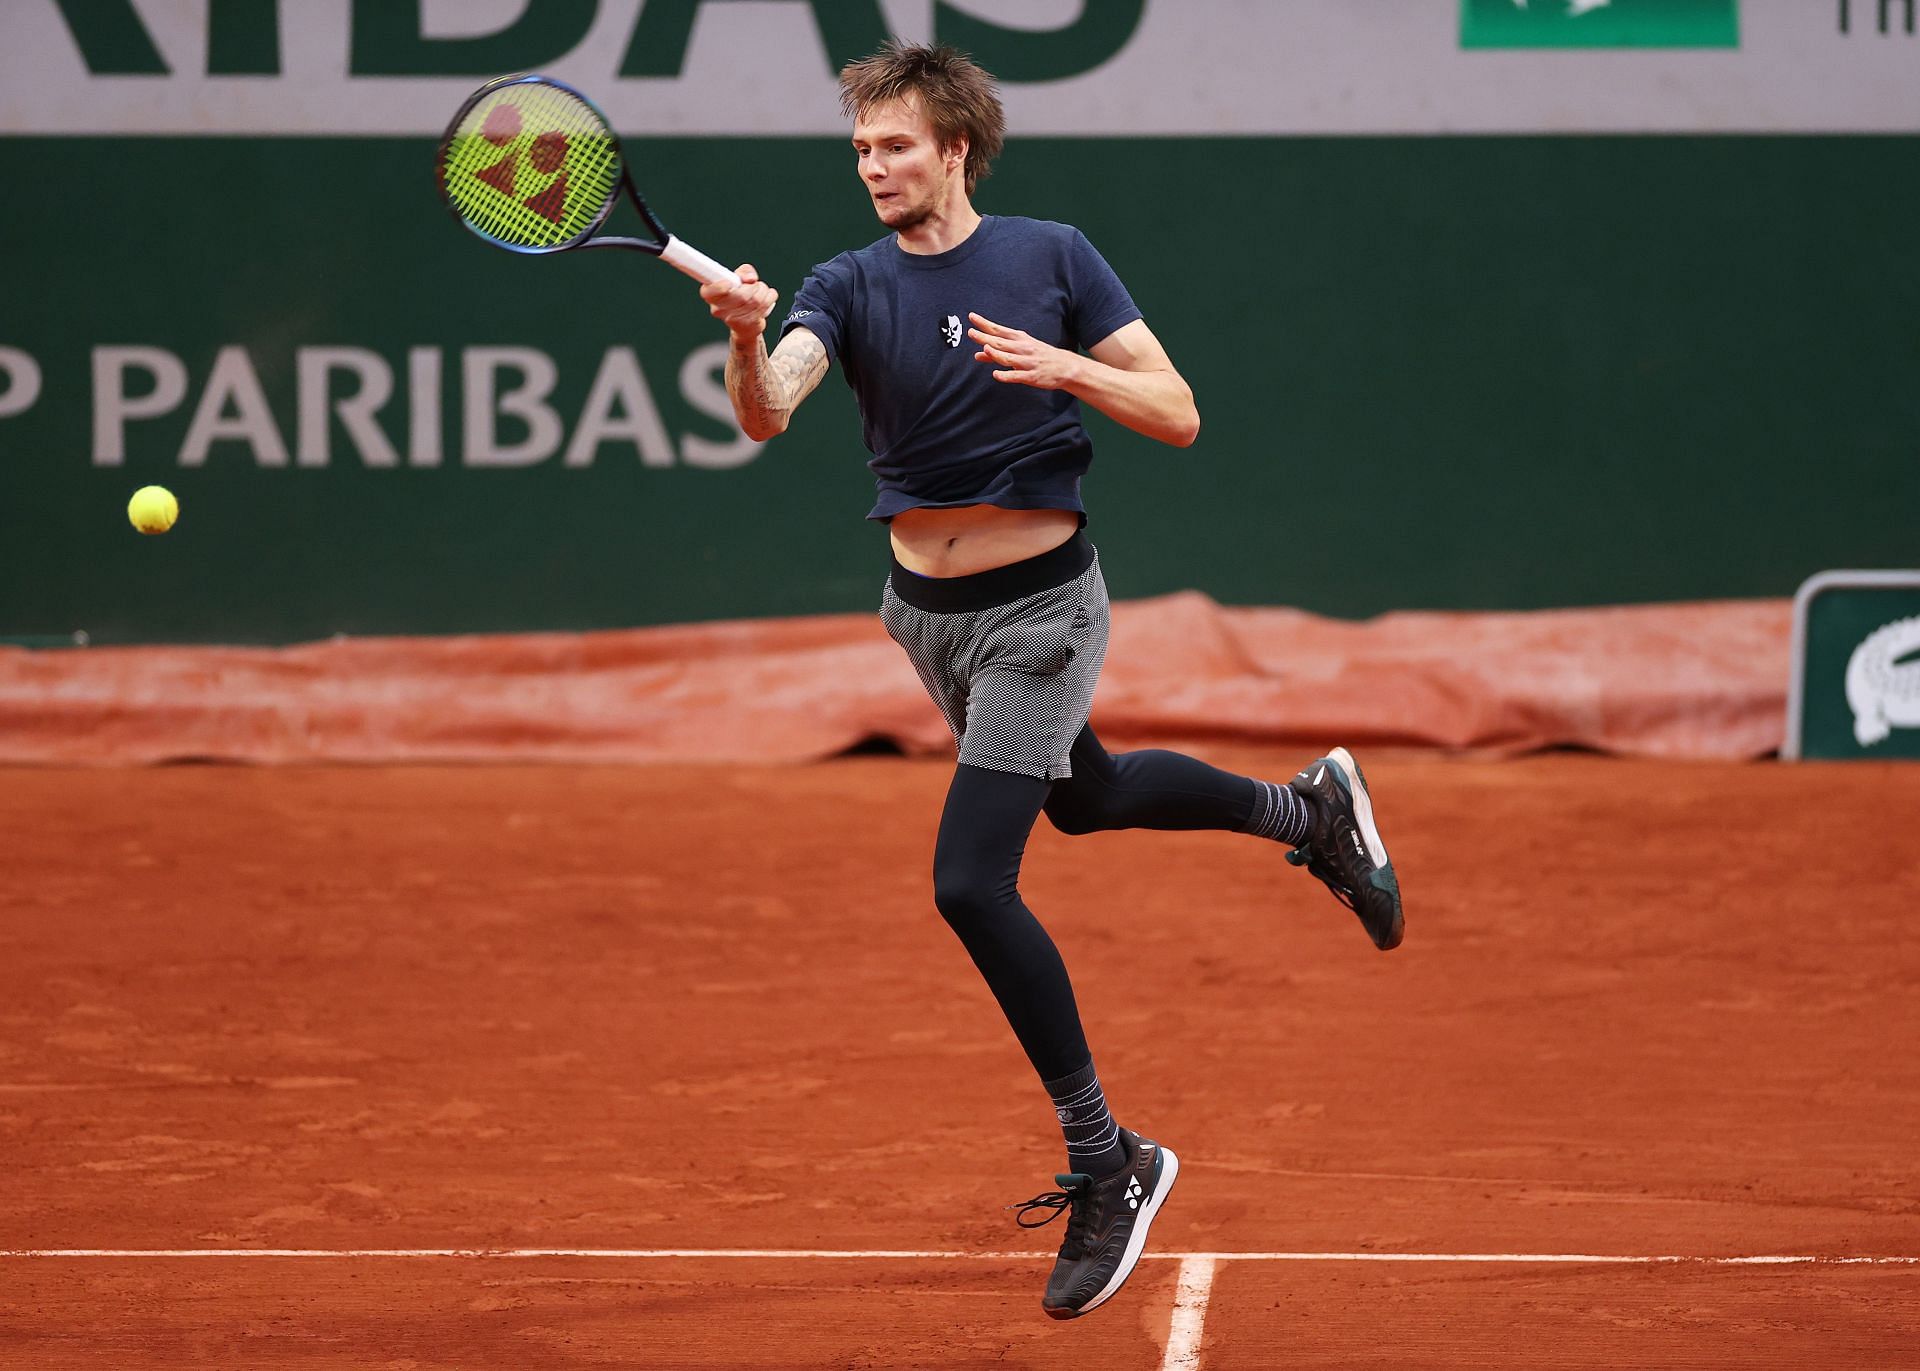 Alexader Bublik at the 2022 French Open